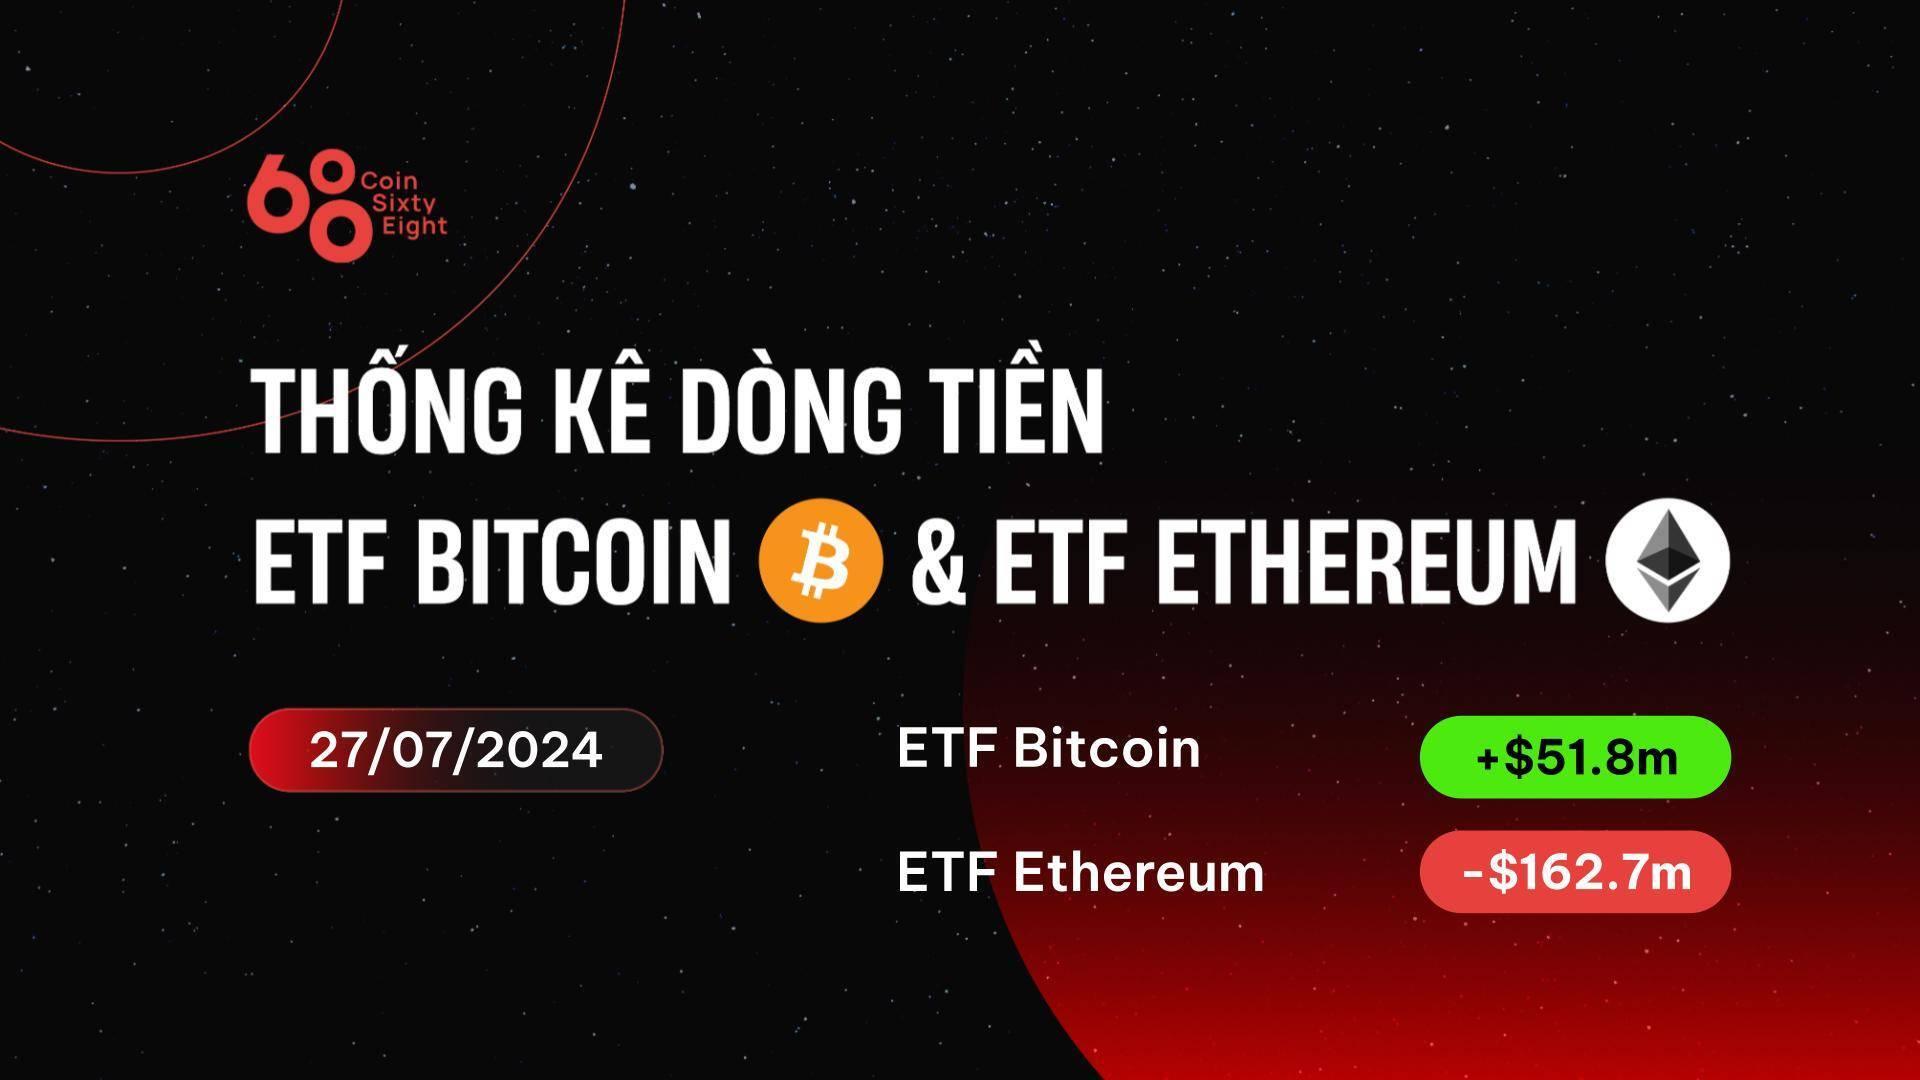 etf-ethereum-ghi-nhan-outflow- ...